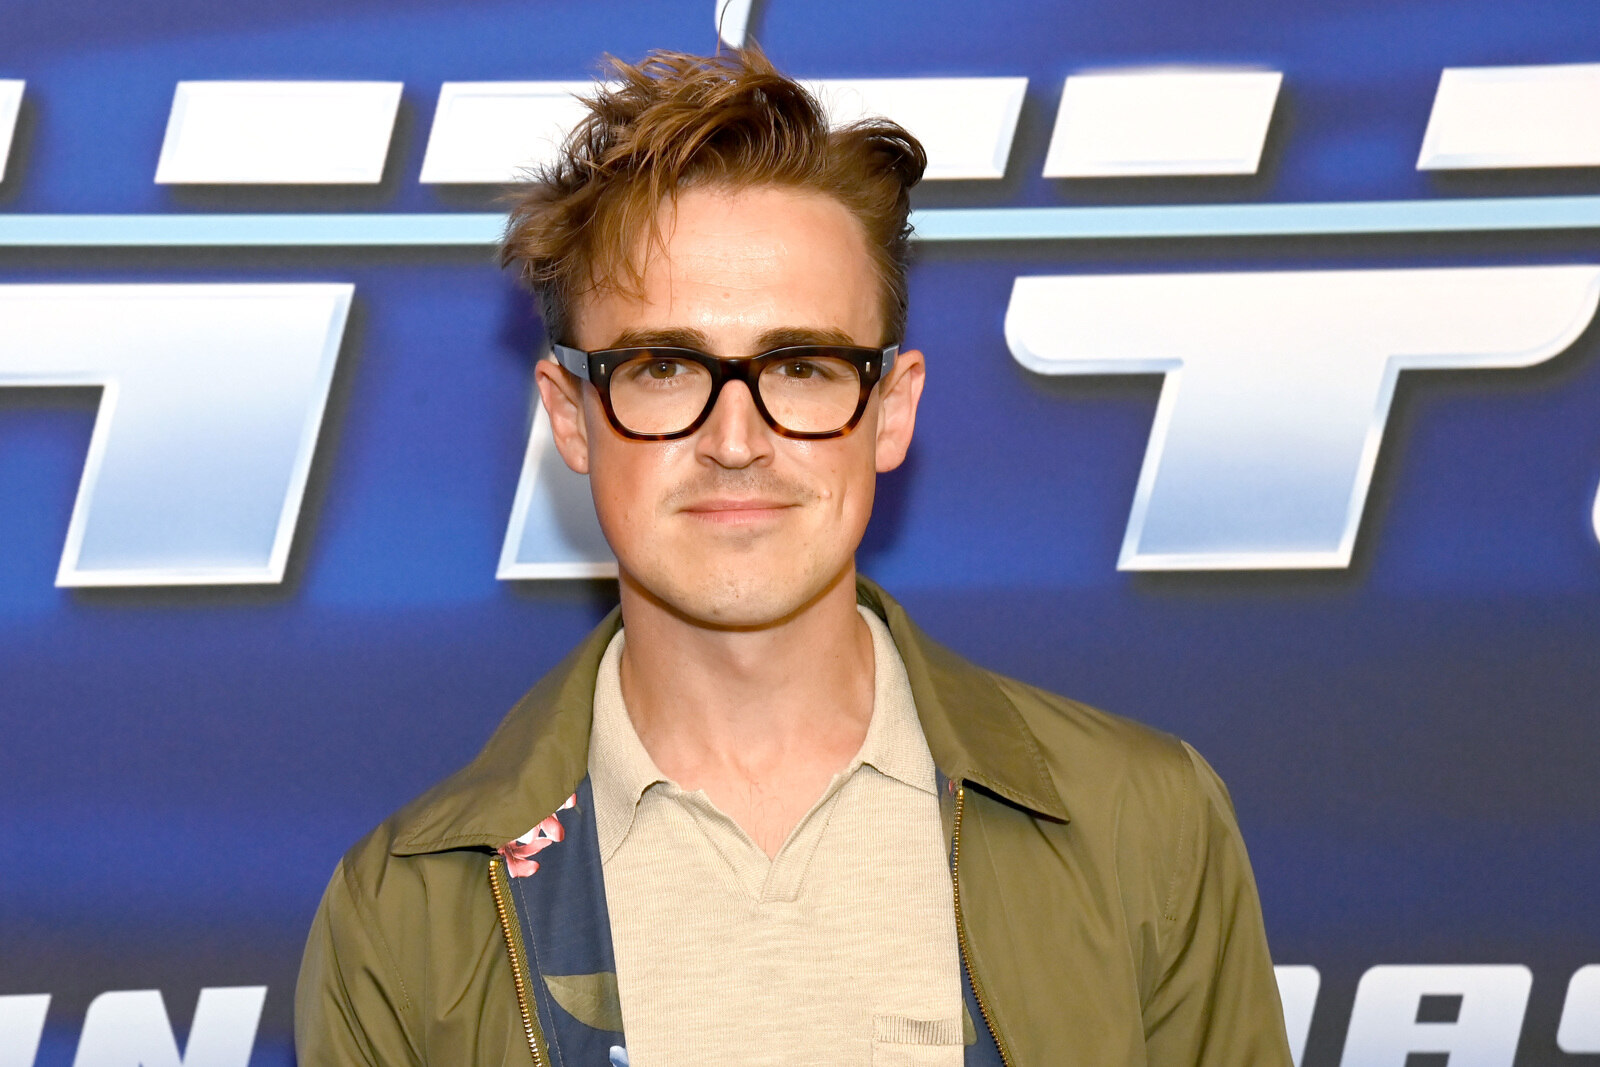 17 Surprising Facts About Tom Fletcher - Facts.net